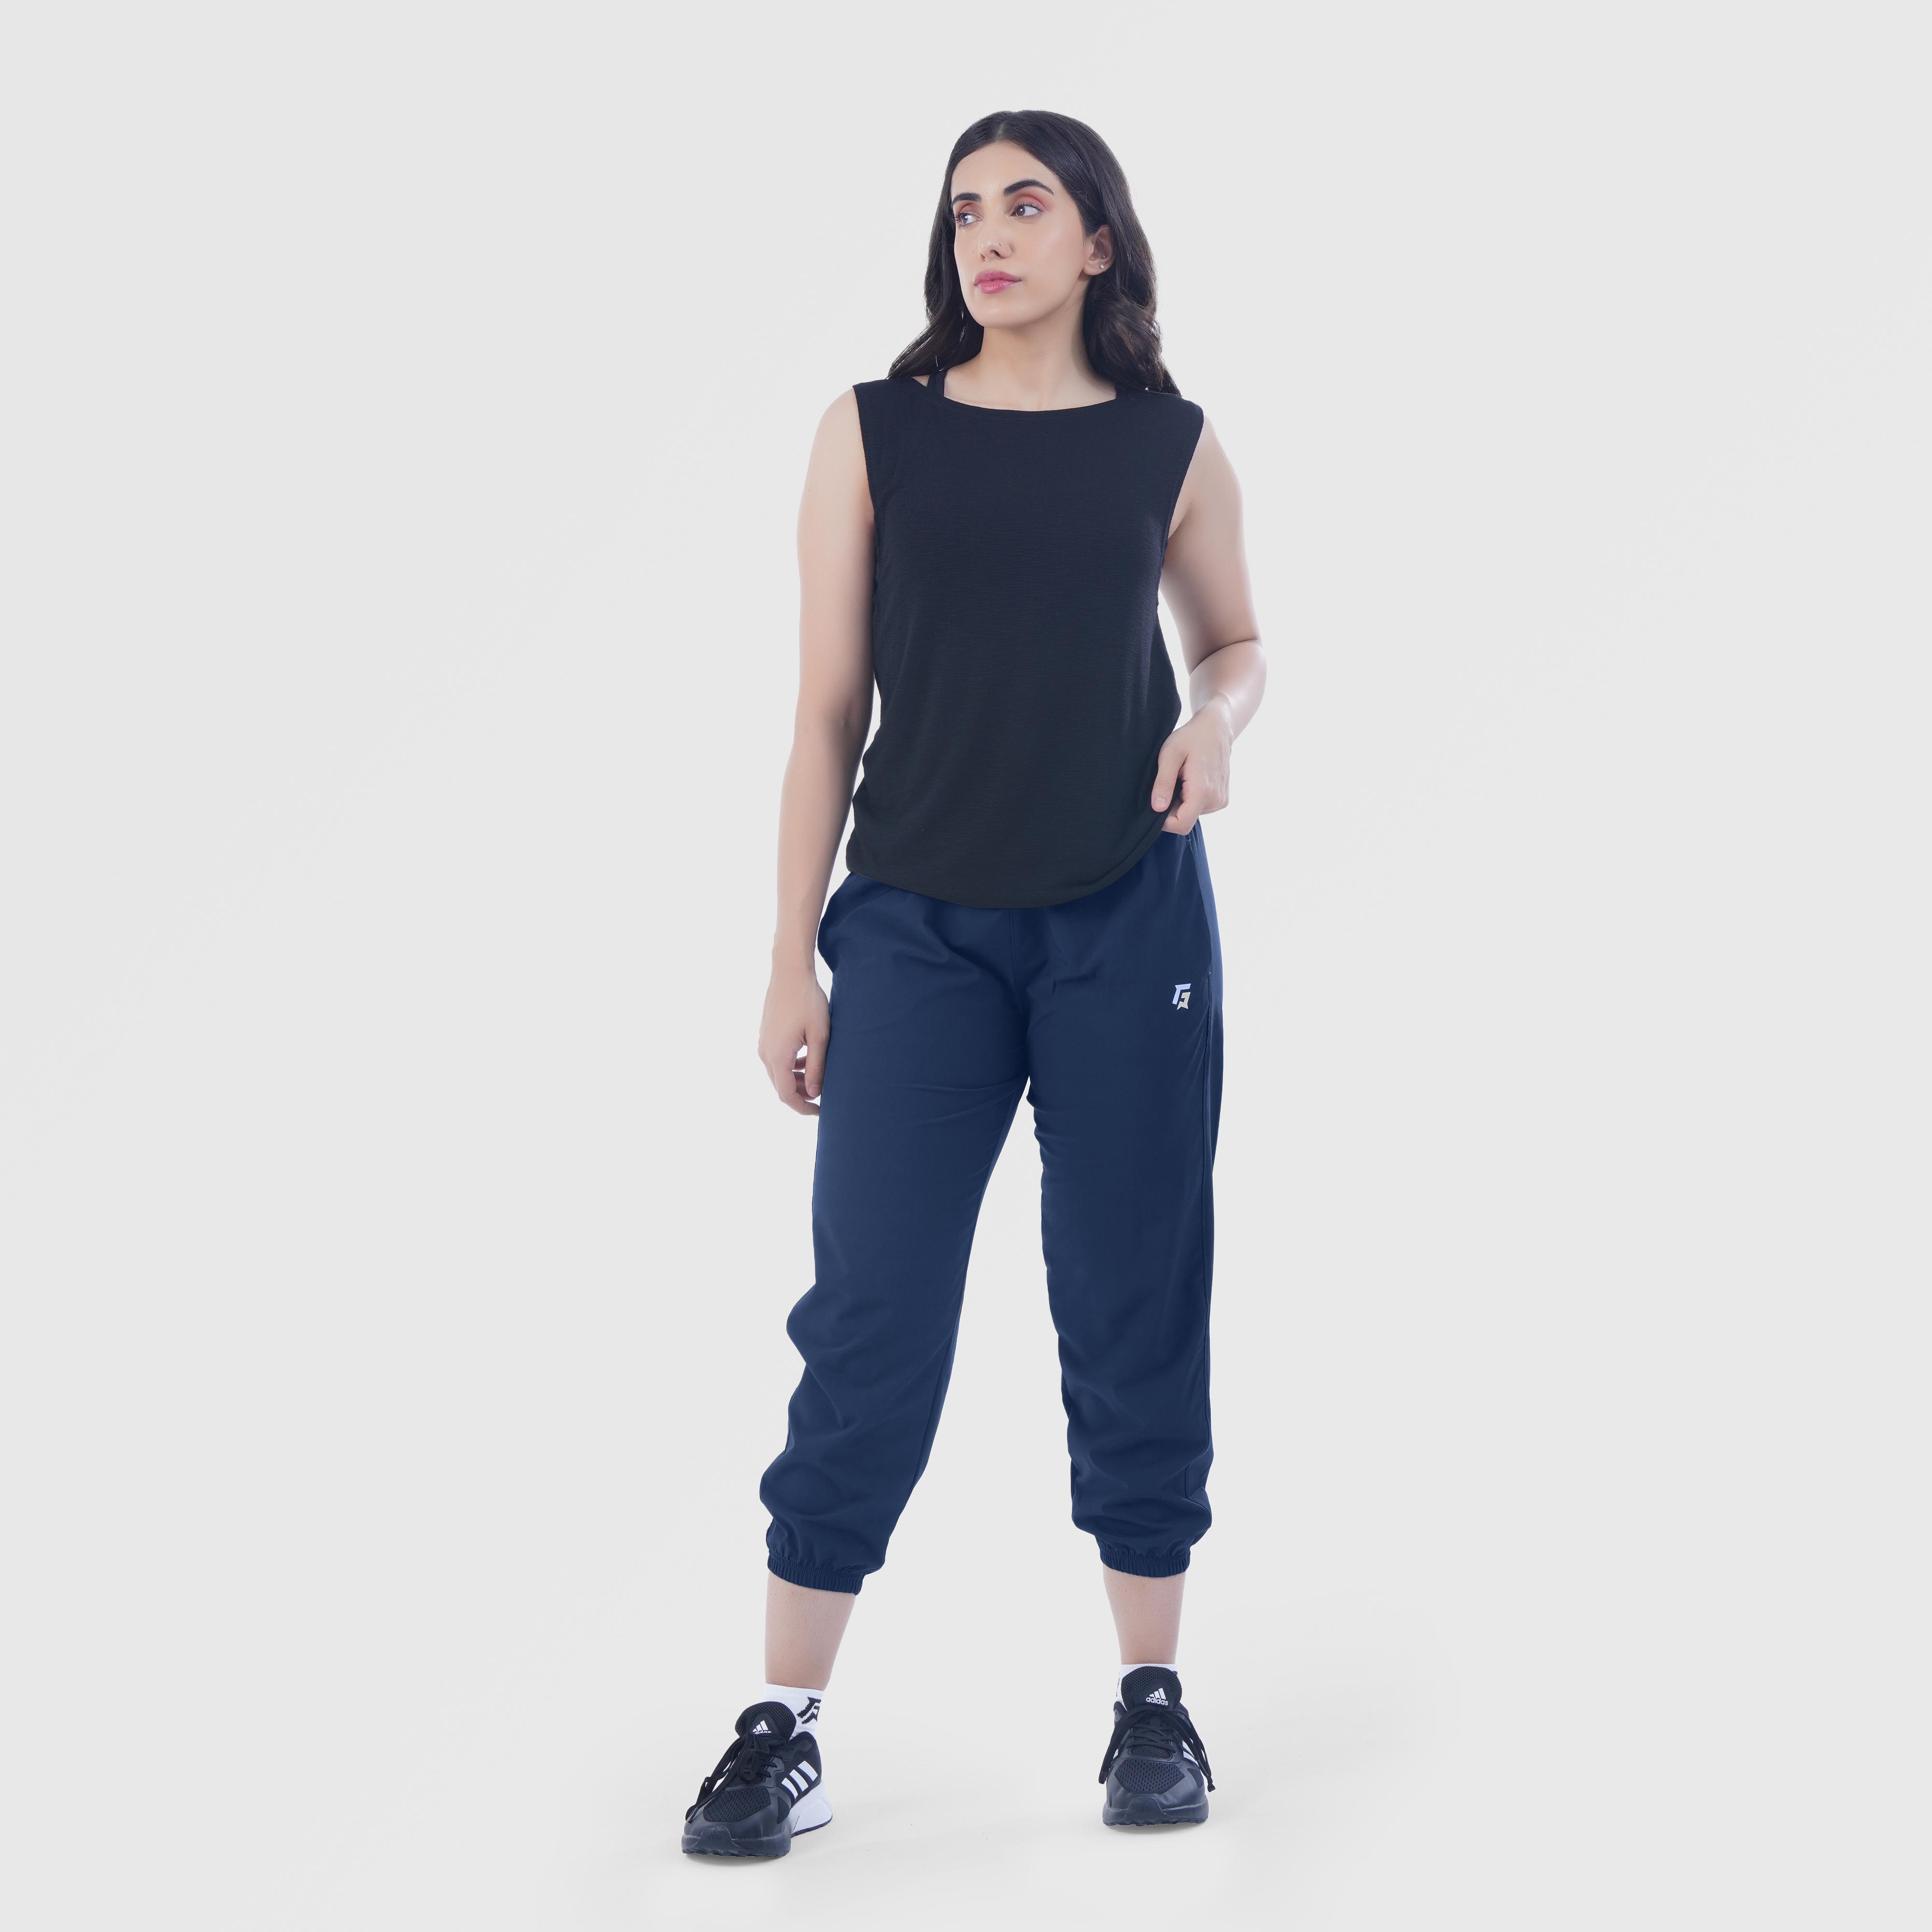 ActiveStride 7/8 Trousers (Navy)